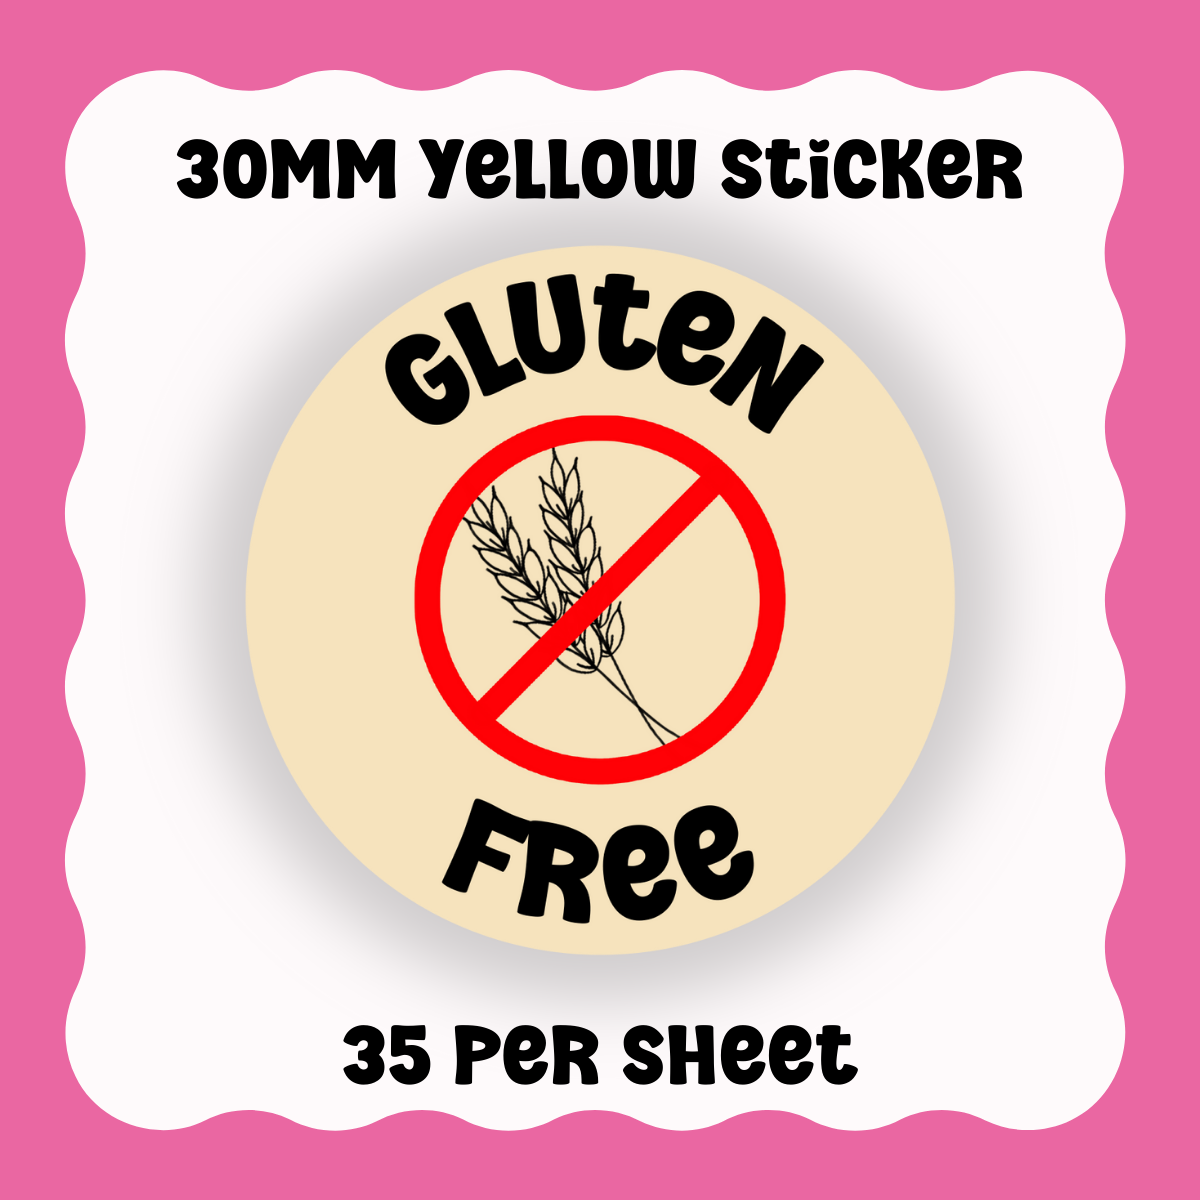 Gluten Free - With Graphic